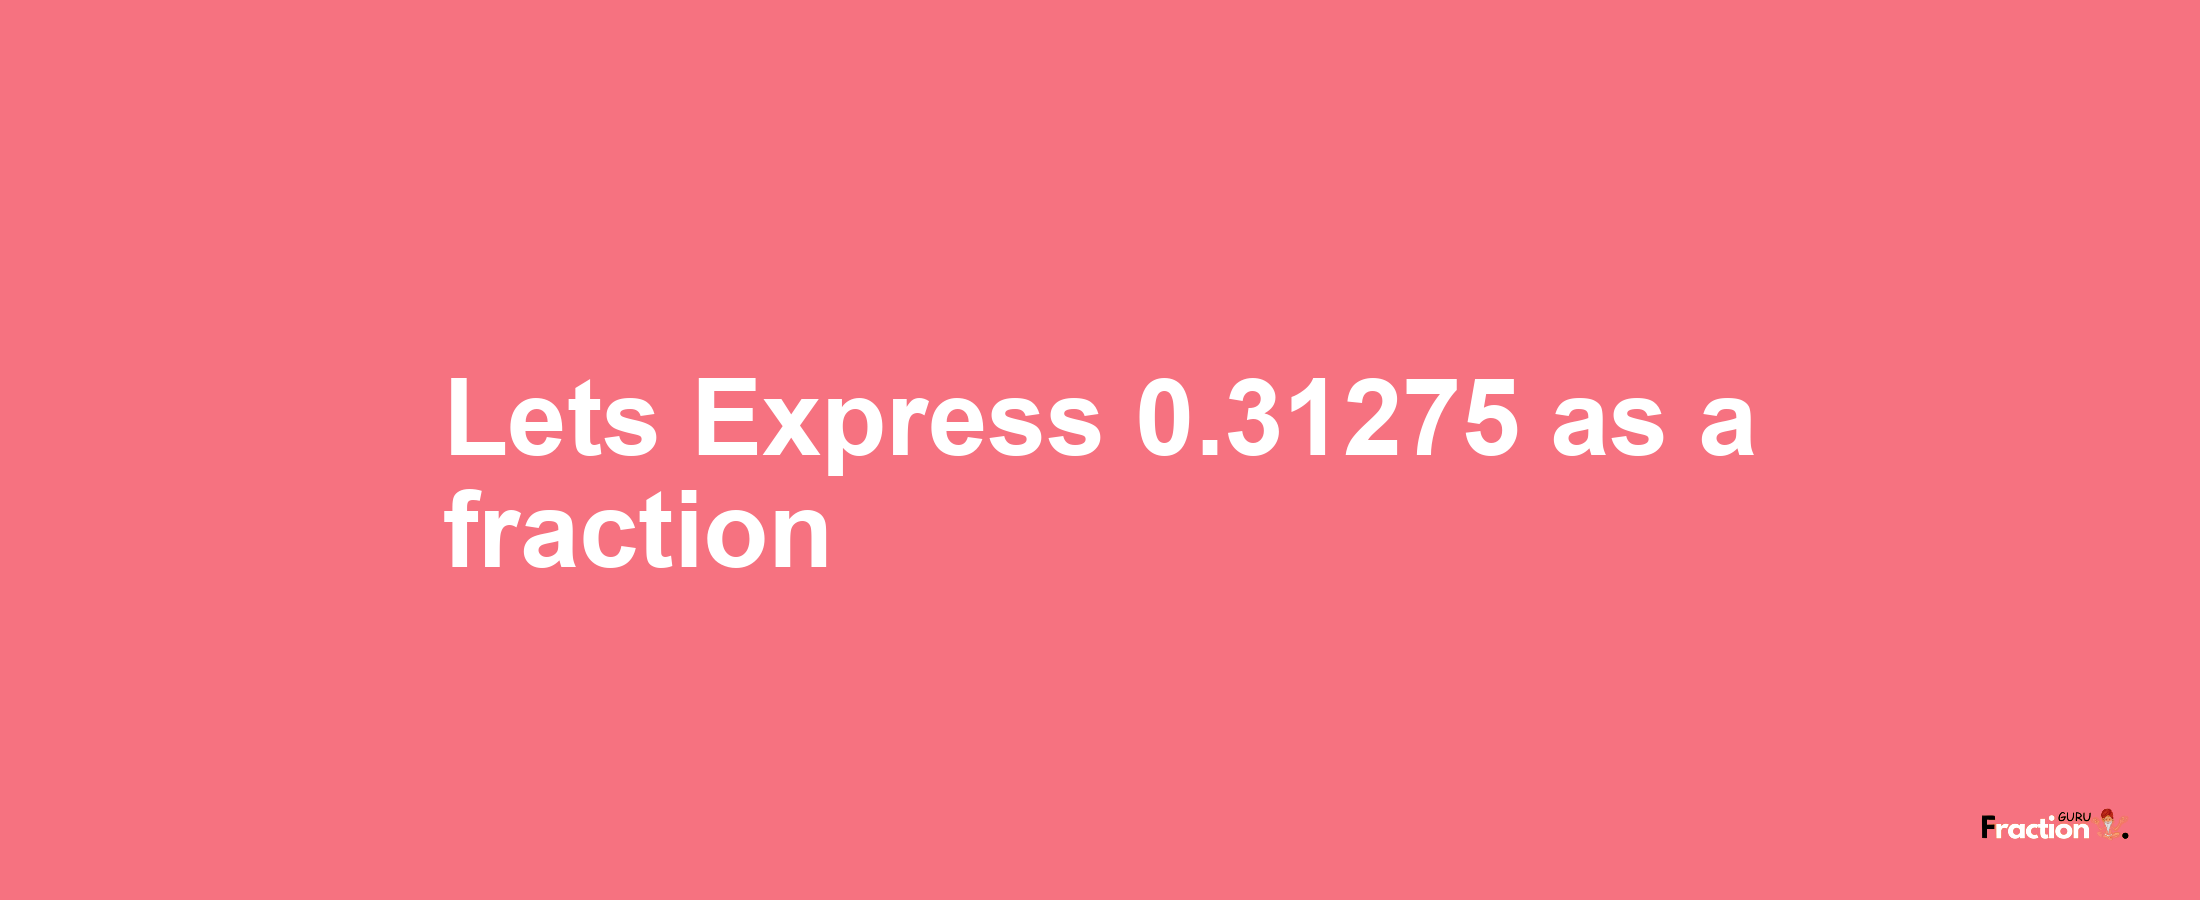 Lets Express 0.31275 as afraction